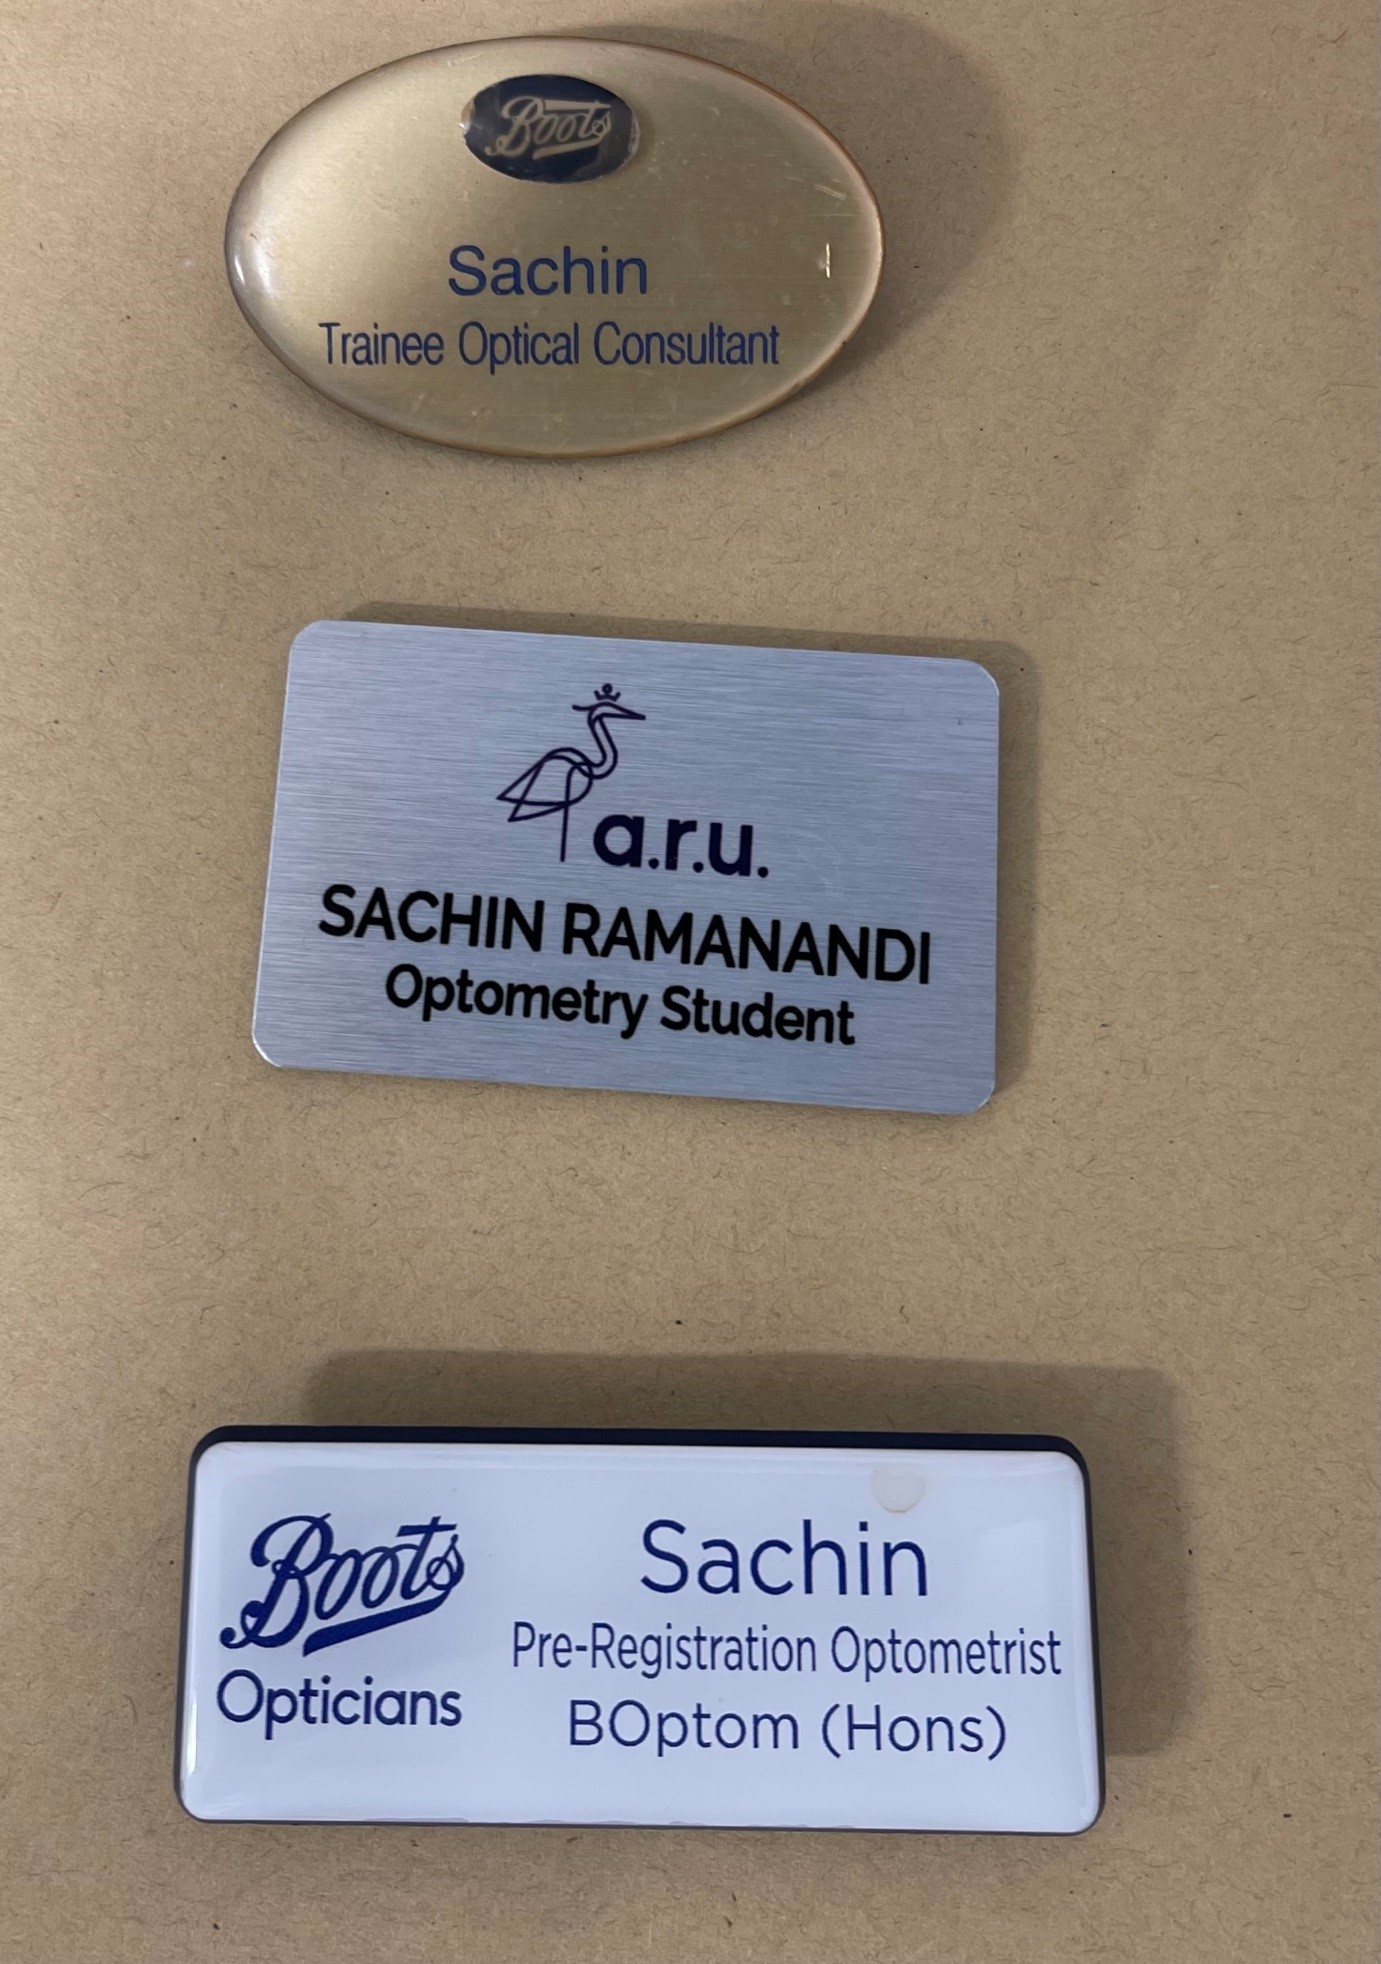 Boots Opticians Careers - Name Badges